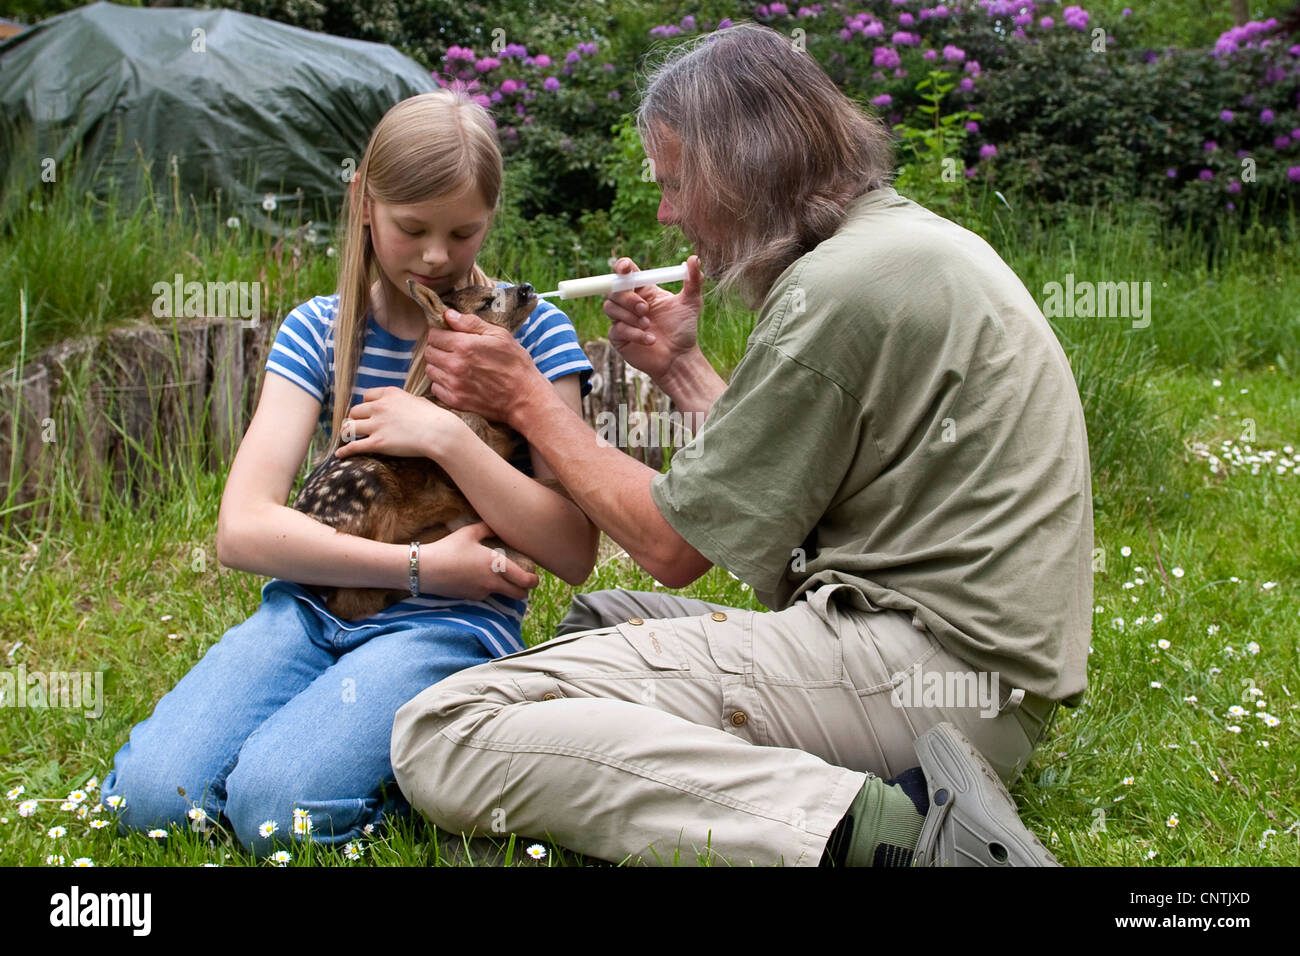 roe deer (Capreolus capreolus), fawn in the arms of a girl is feeded, Germany Stock Photo